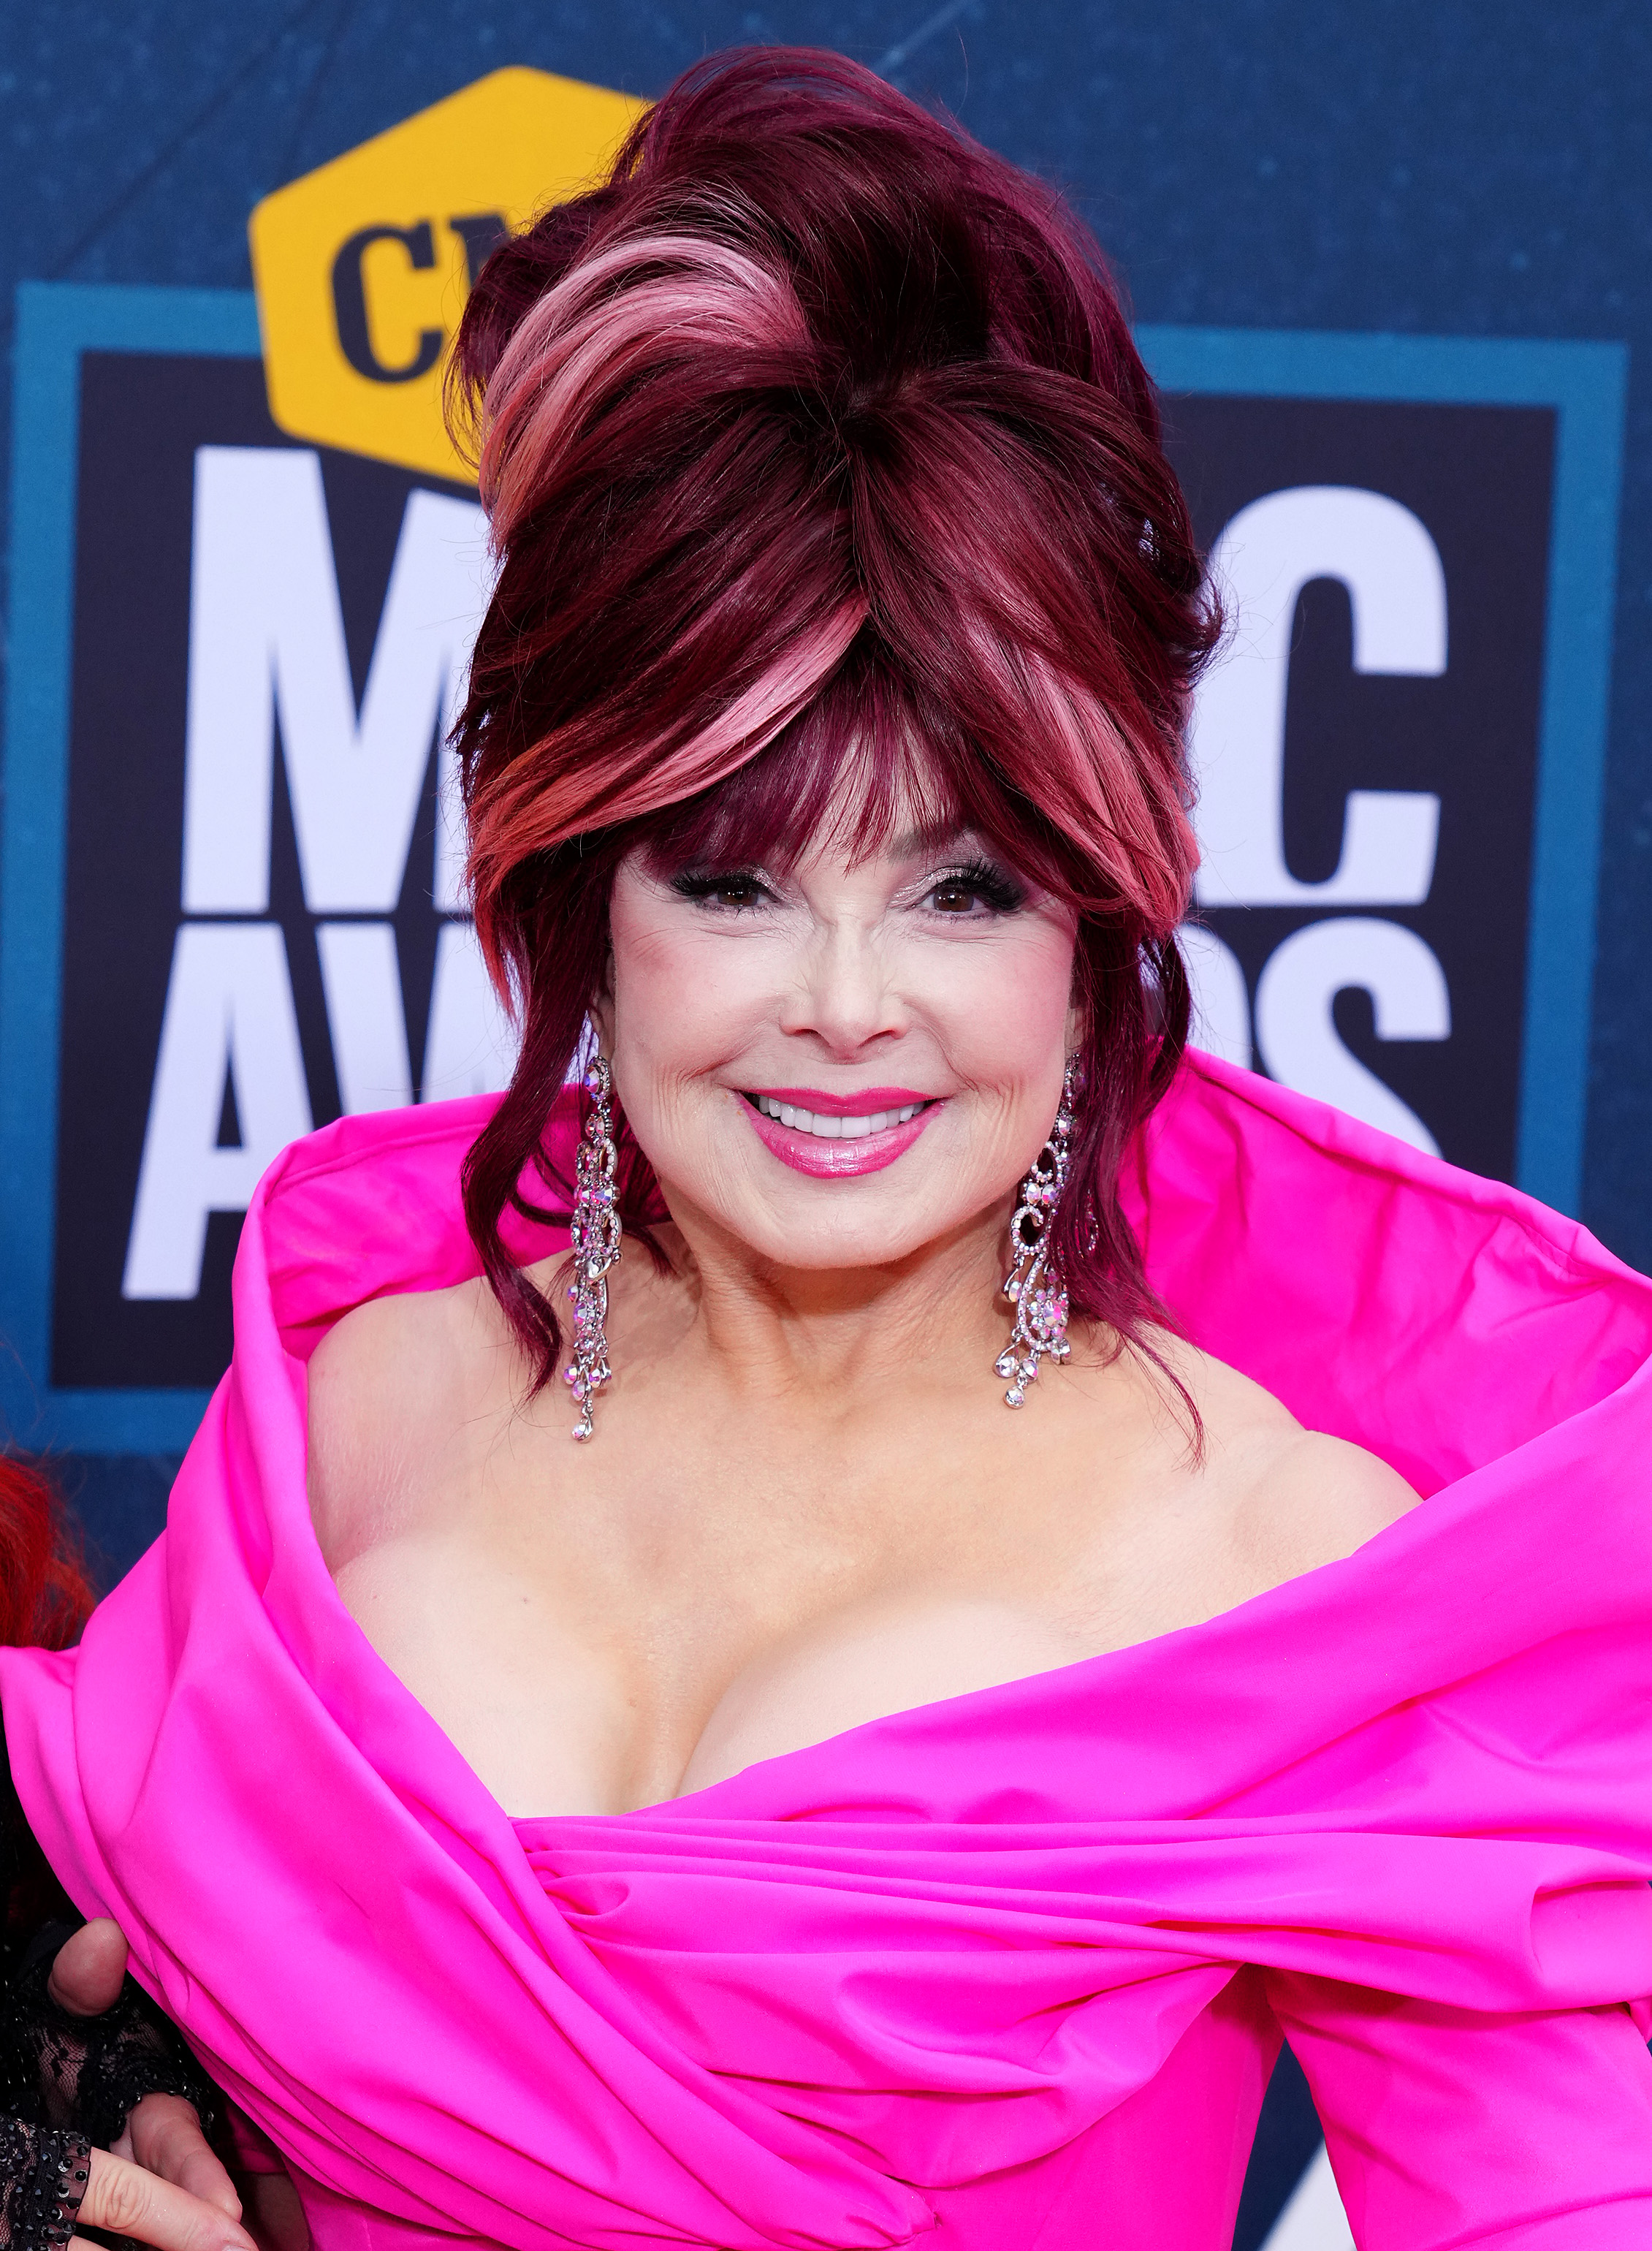 Naomi Judd at the CMT Music Awards in Nashville on April 11, 2022 | Source: Getty Images